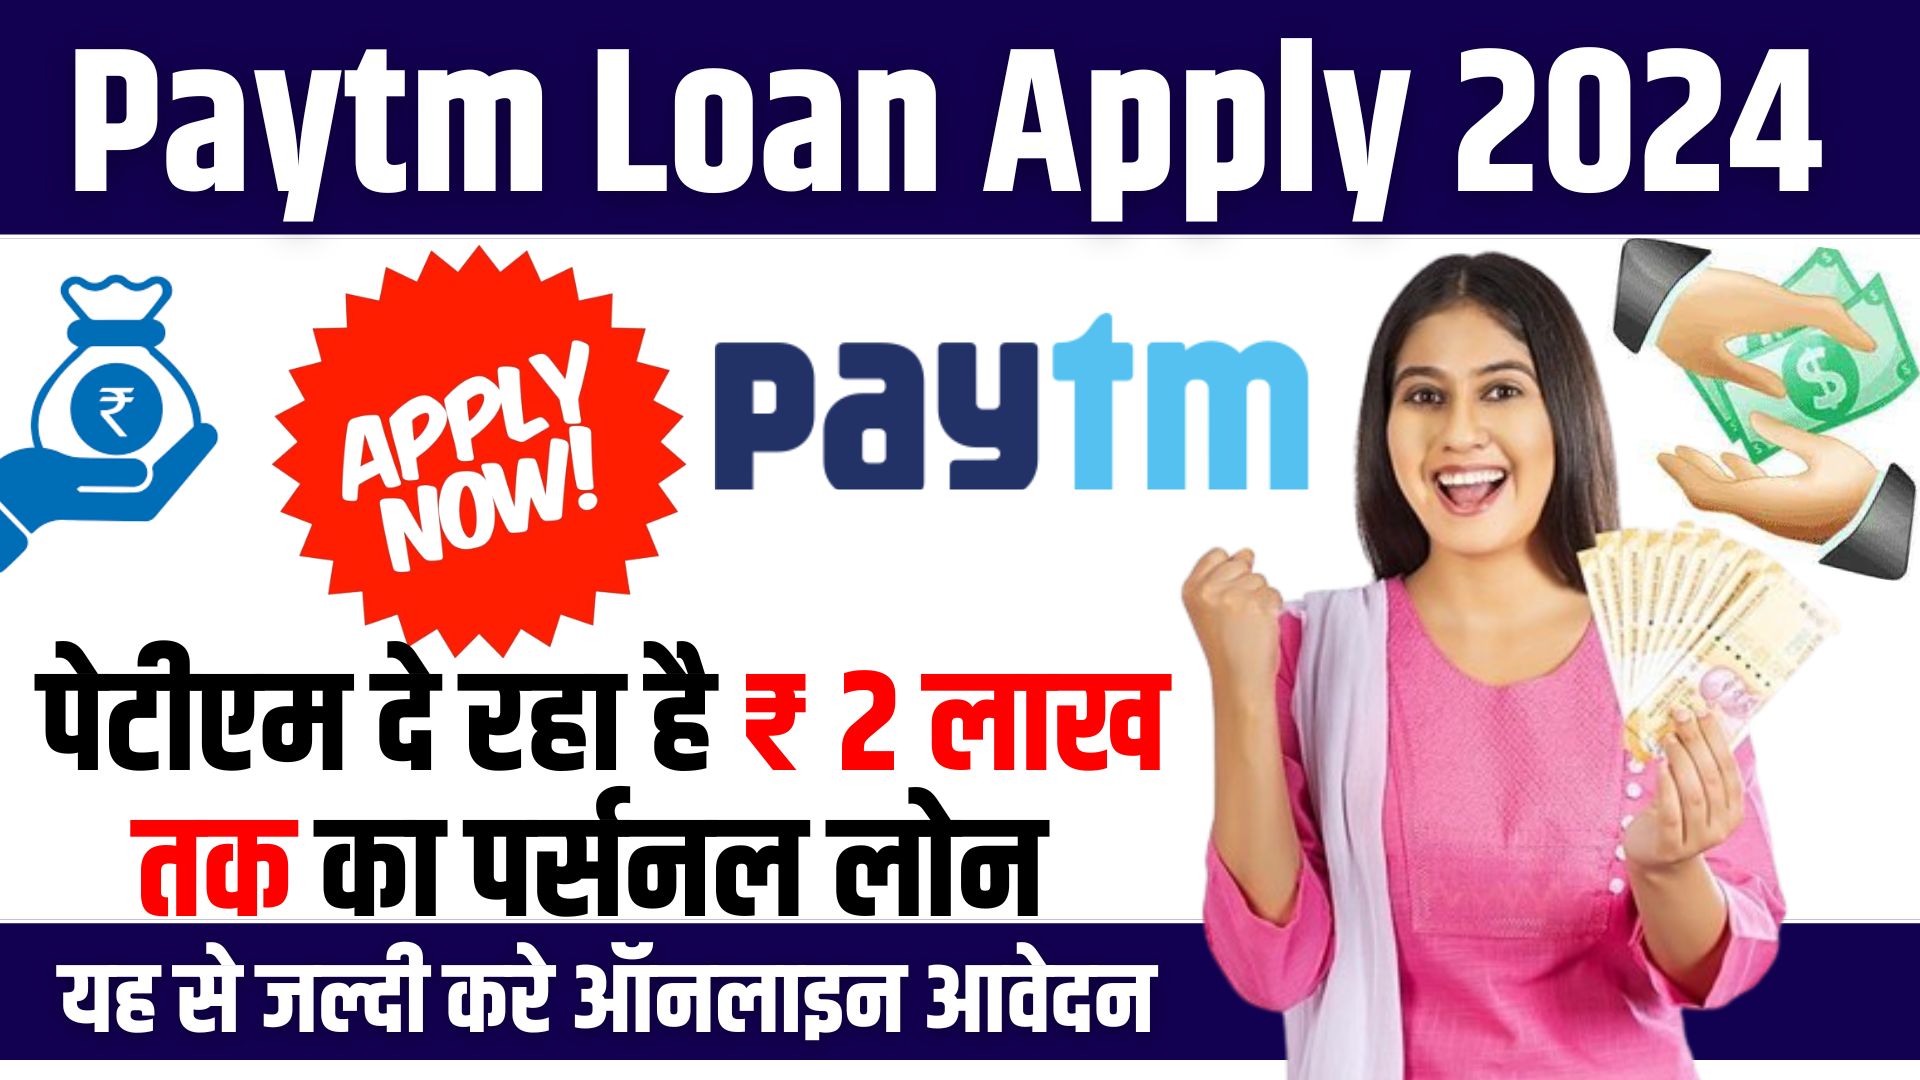 Paytm Instant Personal Loan